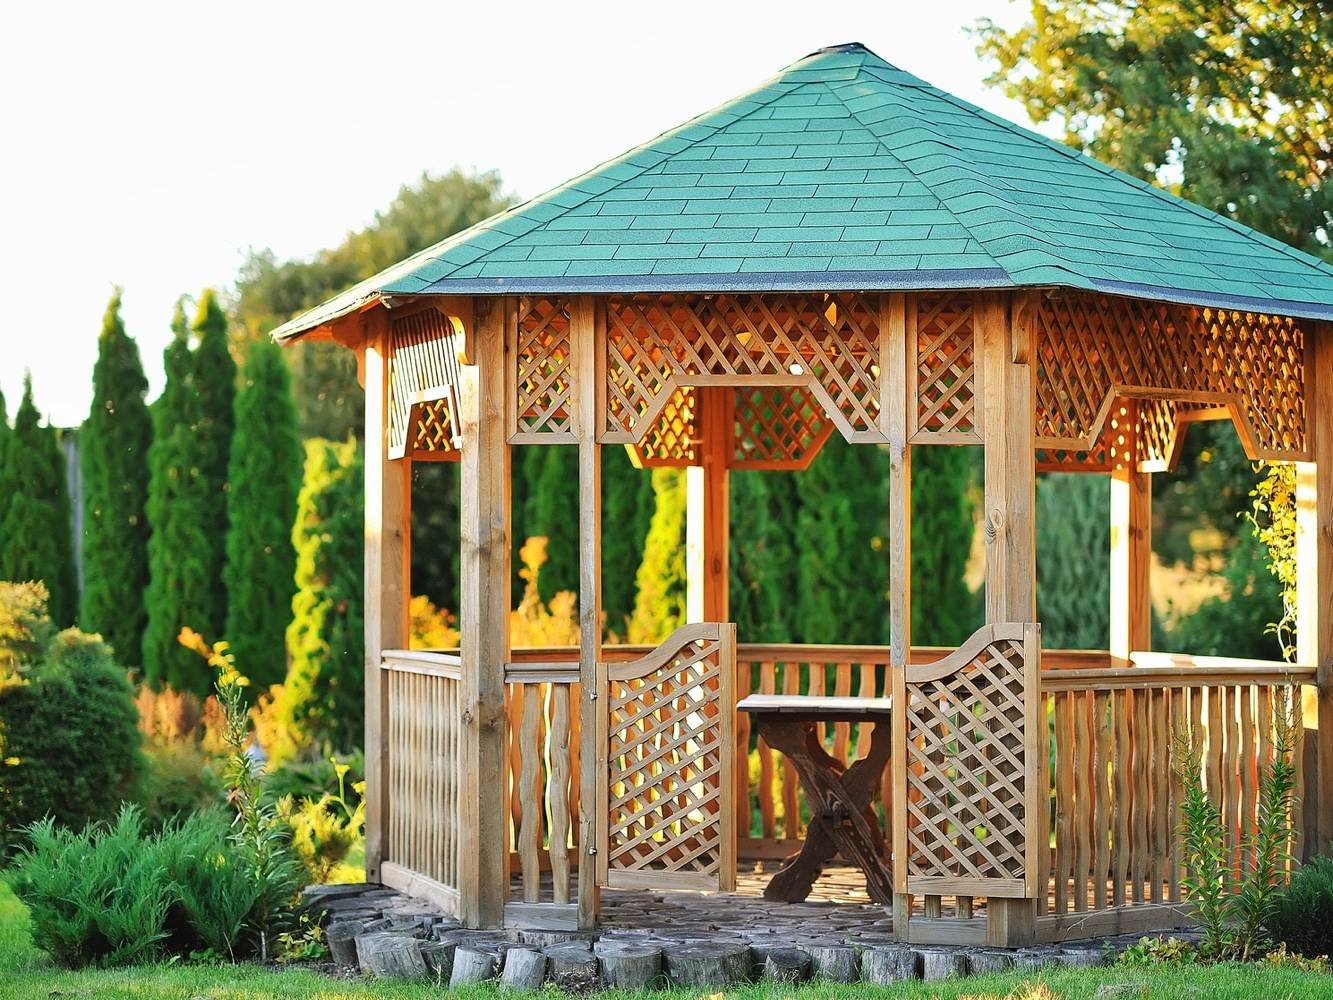 This image shows a beautiful gazebo with a green roof with pine trees behind it and the sun shining.